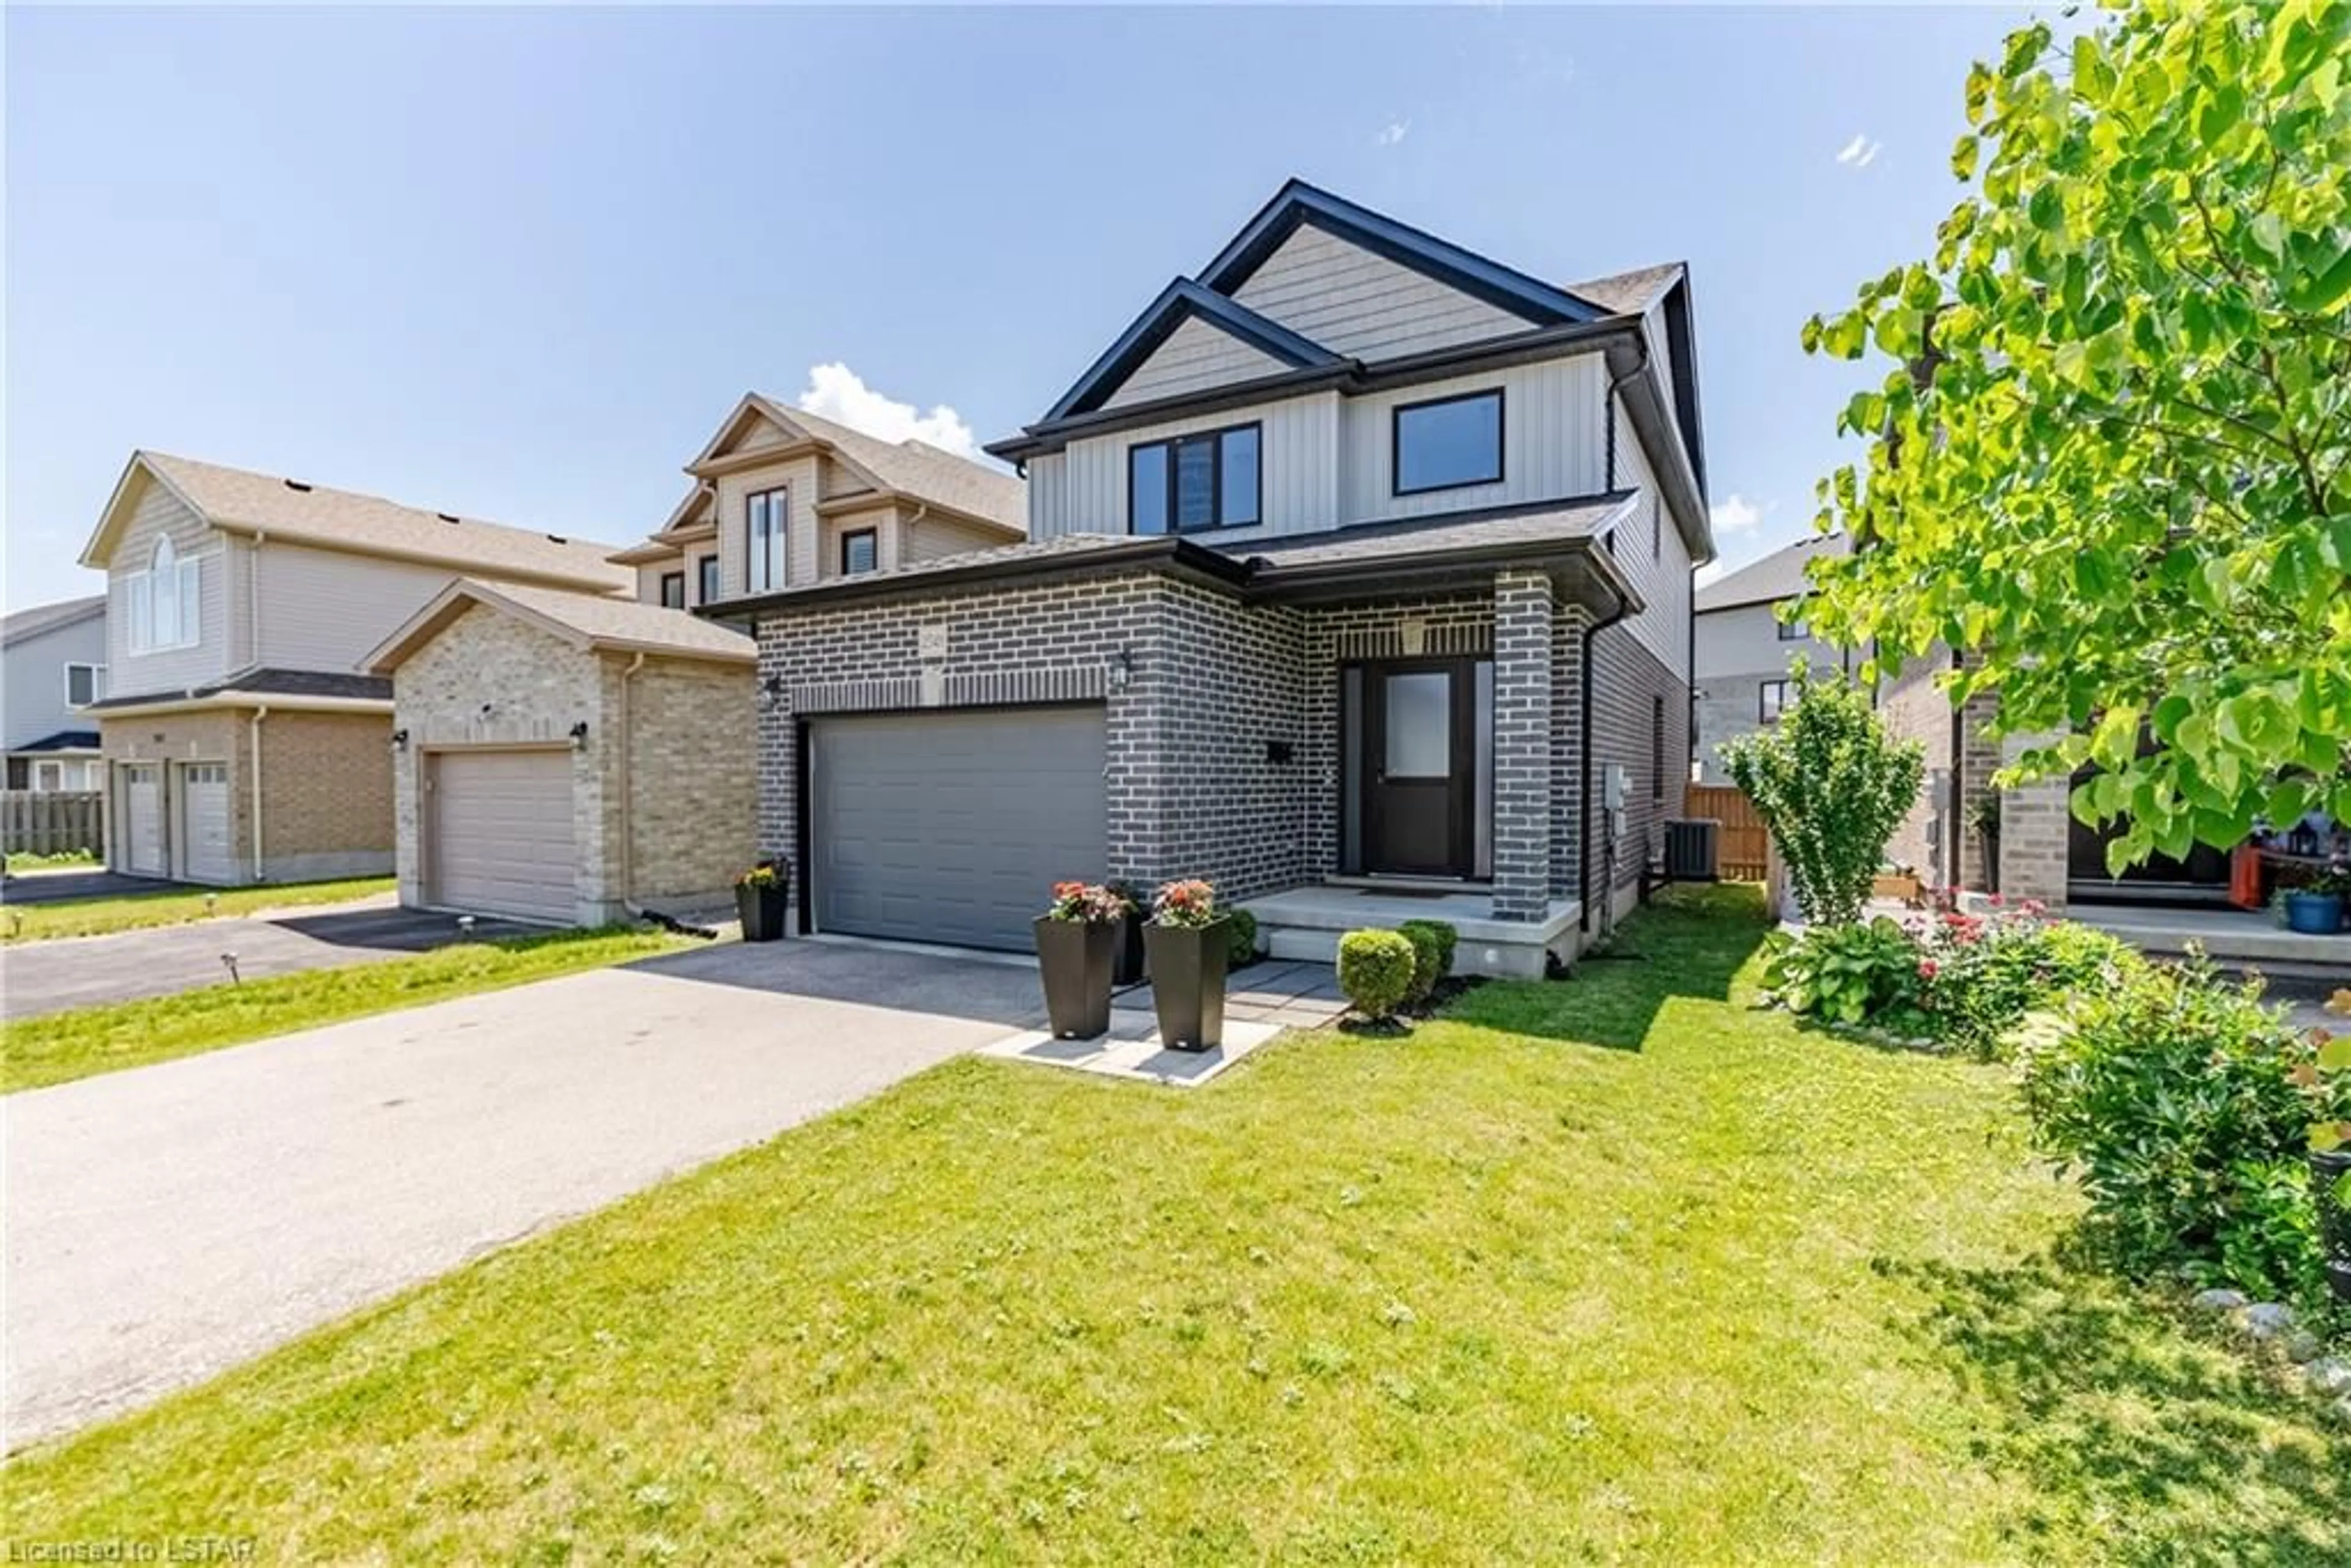 Frontside or backside of a home for 2549 Asima Dr, London Ontario N6M 0B4